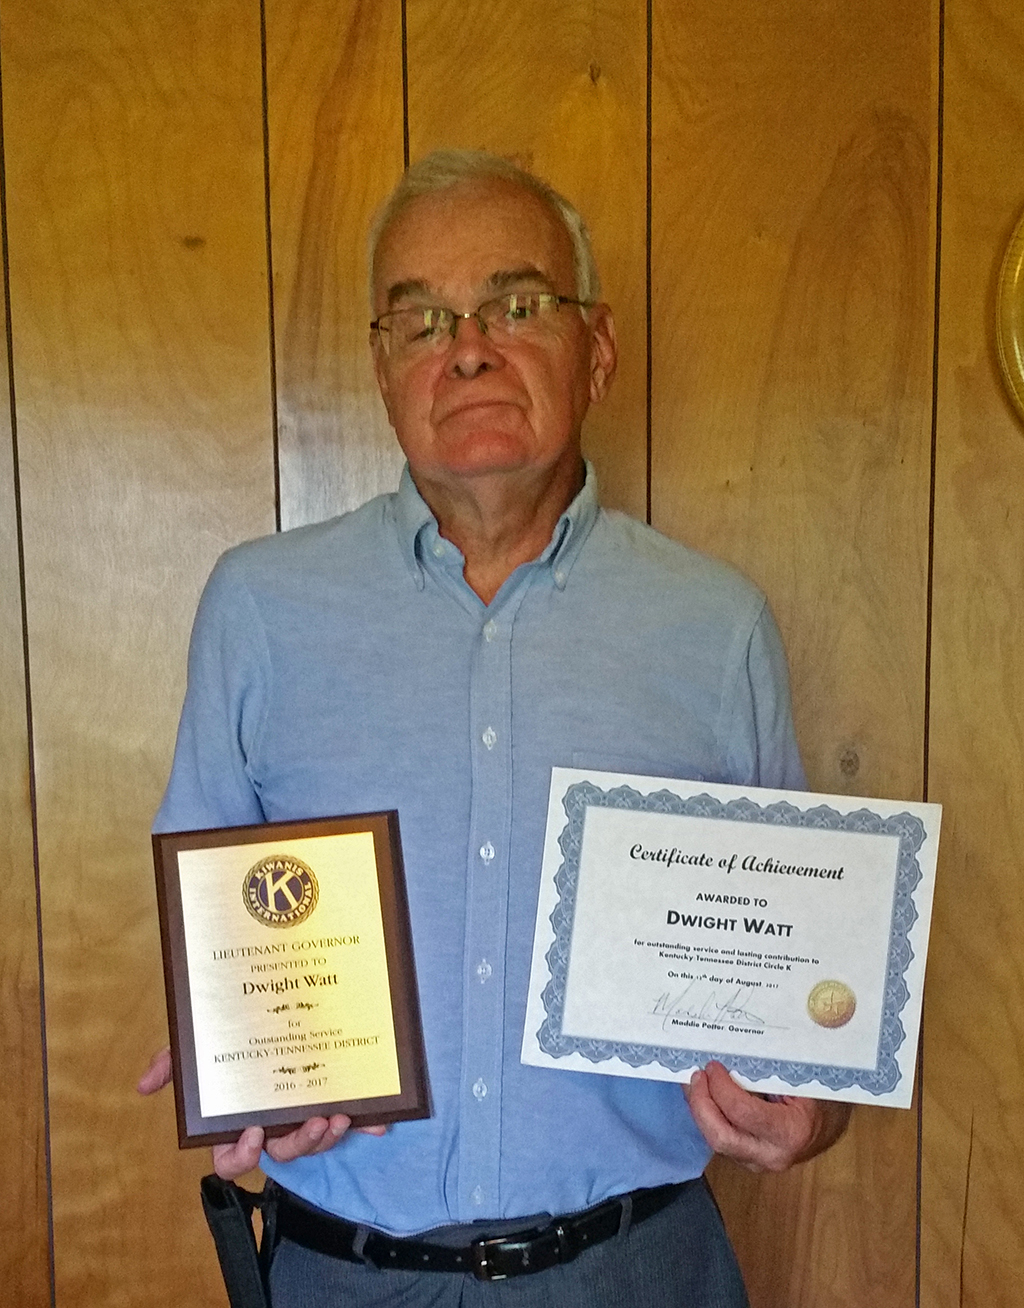 Dr. Dwight Watt shortly after receiving his awards for achievement for work with the Kentucky-Tennessee Regional Kiwanis Club Conference. The annual event was held for the 99th time this past summer. Louisville, Kentucky serves at the host site.